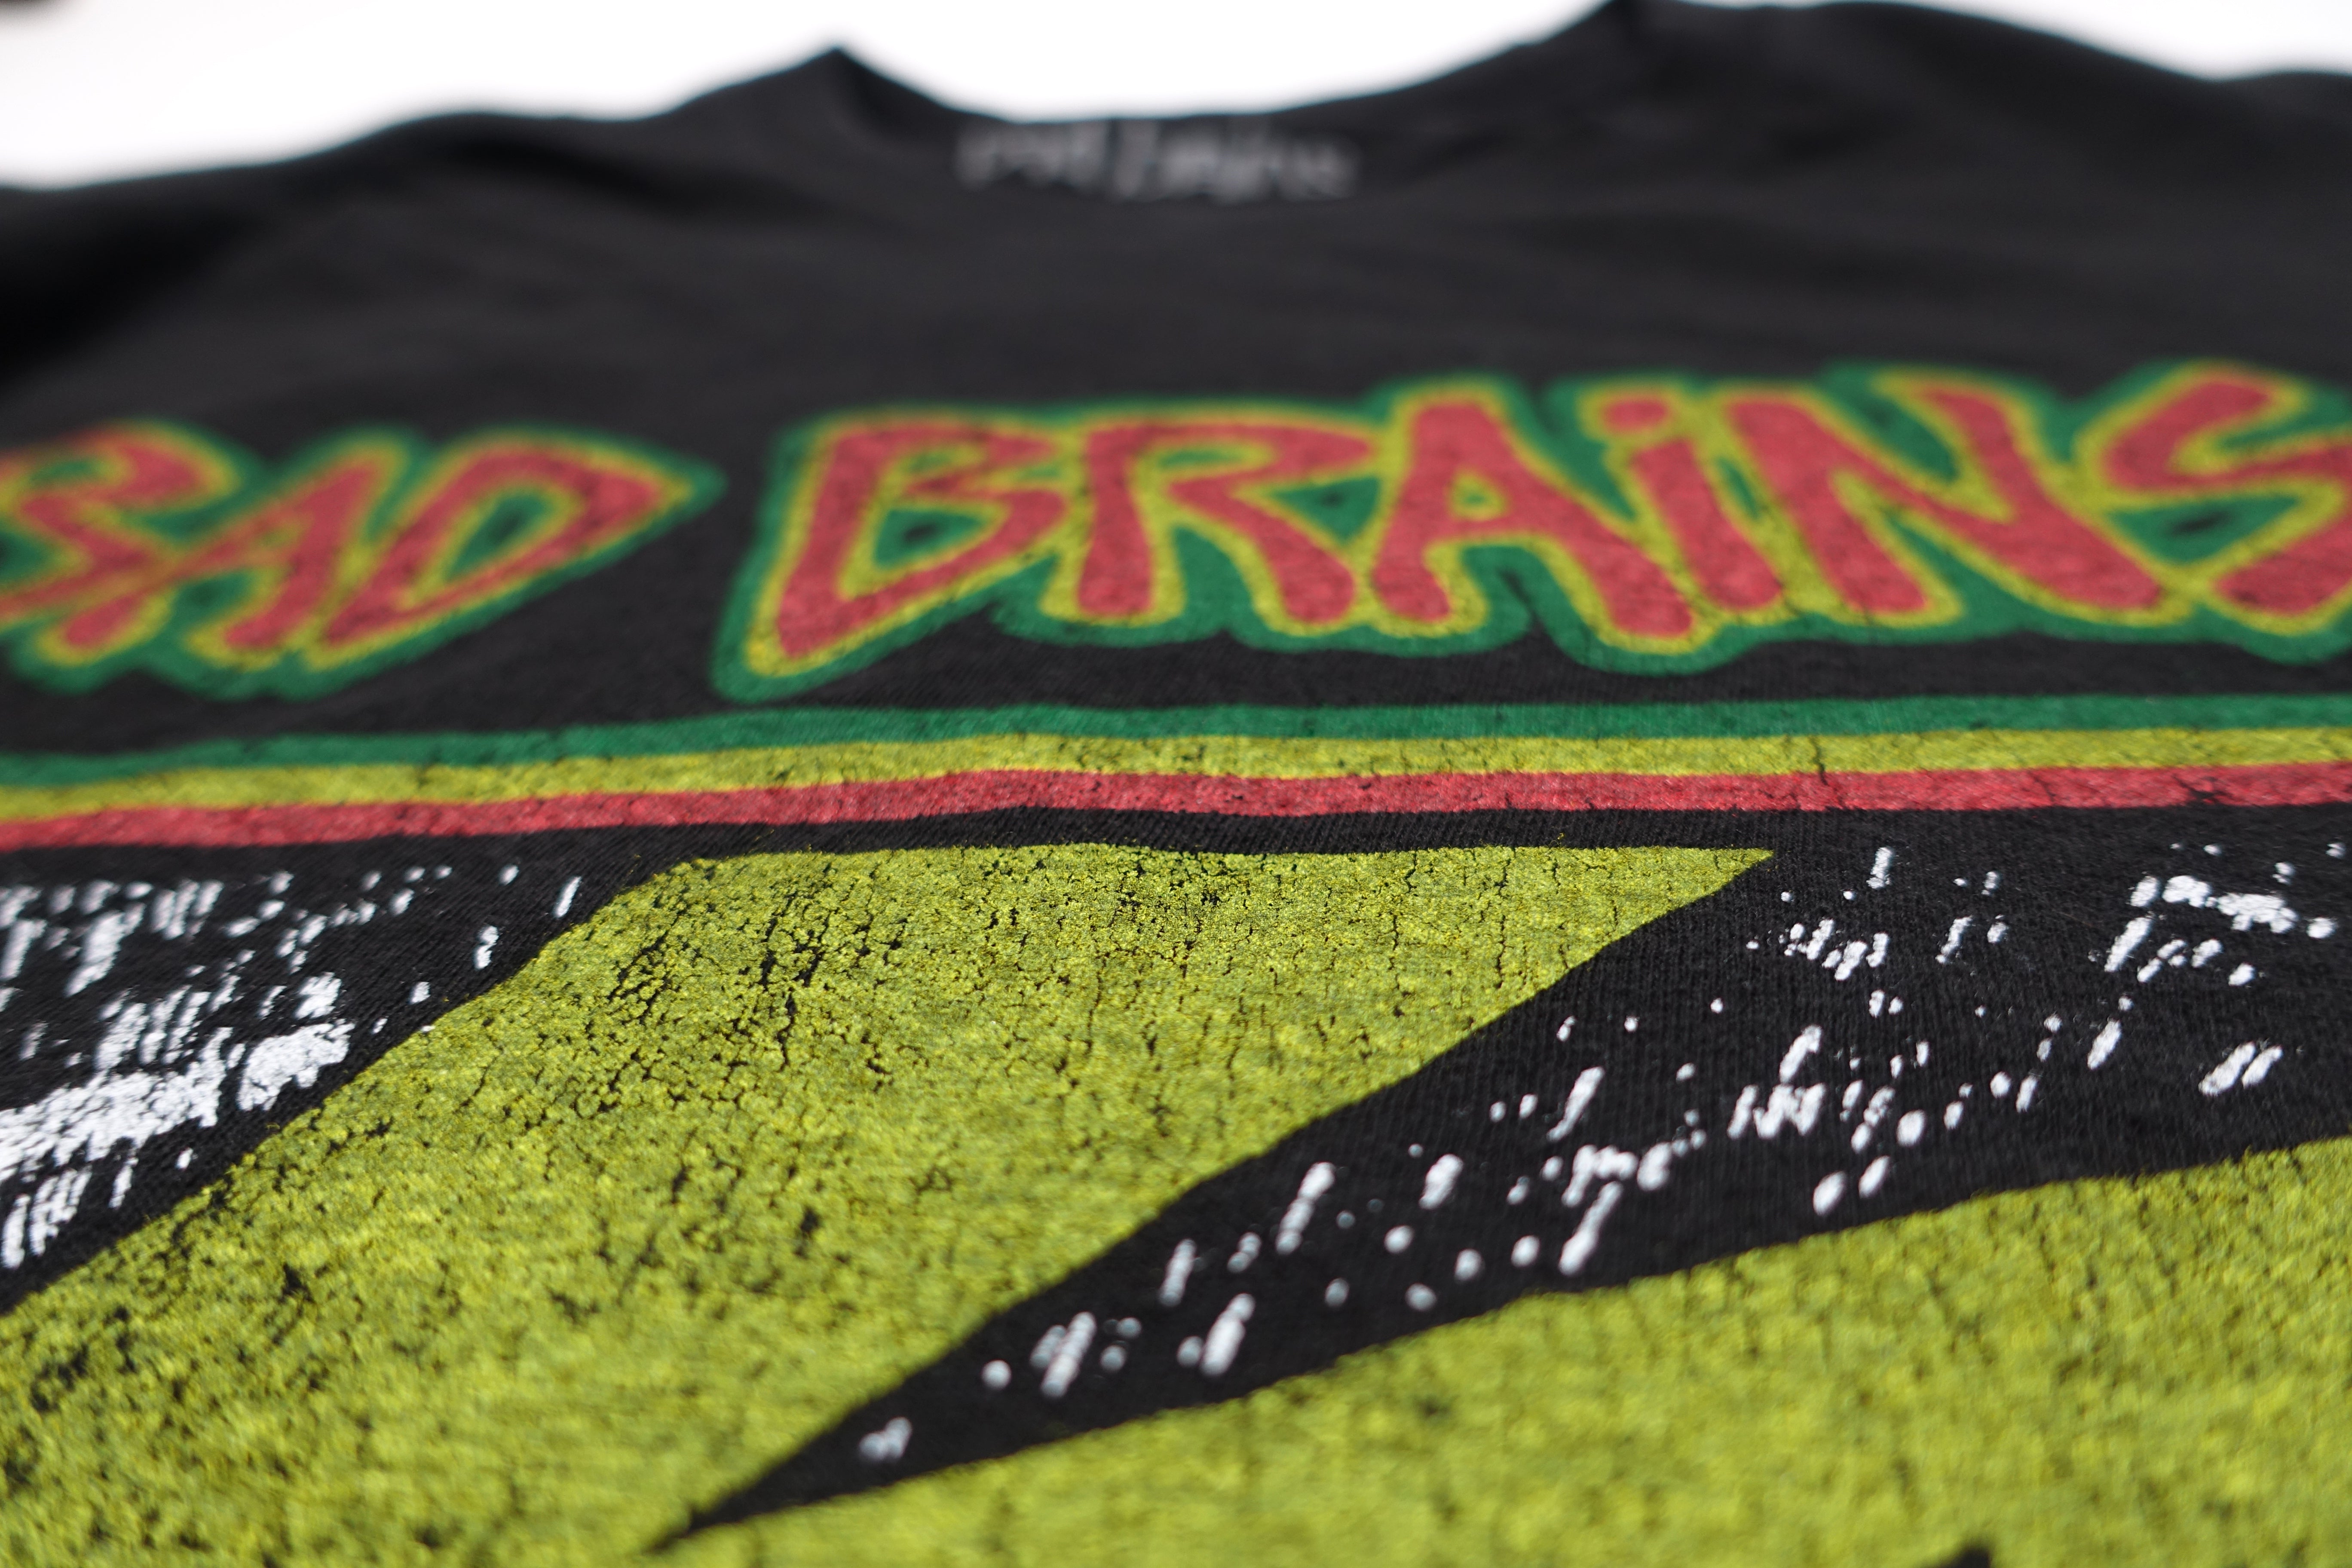 Bad Brains - Self Titled Official Re-issue Shirt Size Small